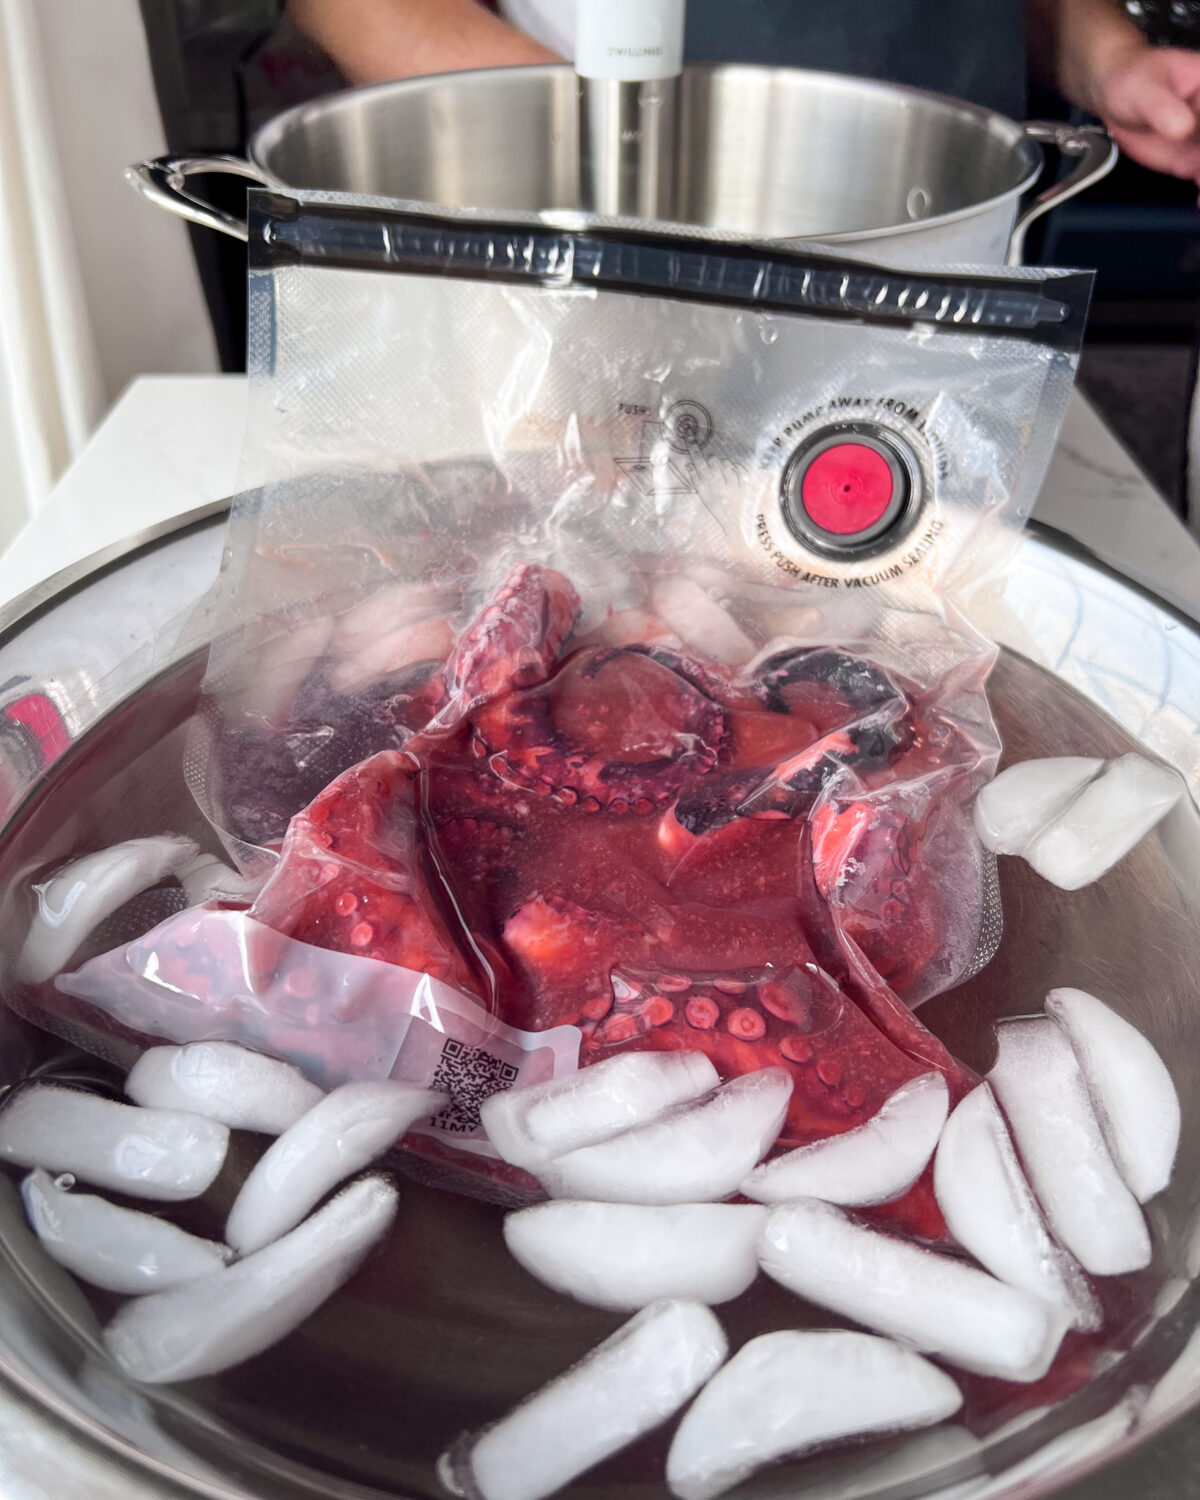 When the octopus has finished cooking in the sous-vide bath, carefully remove the bag, and place it into a large bowl of ice water to stop the cooking process.